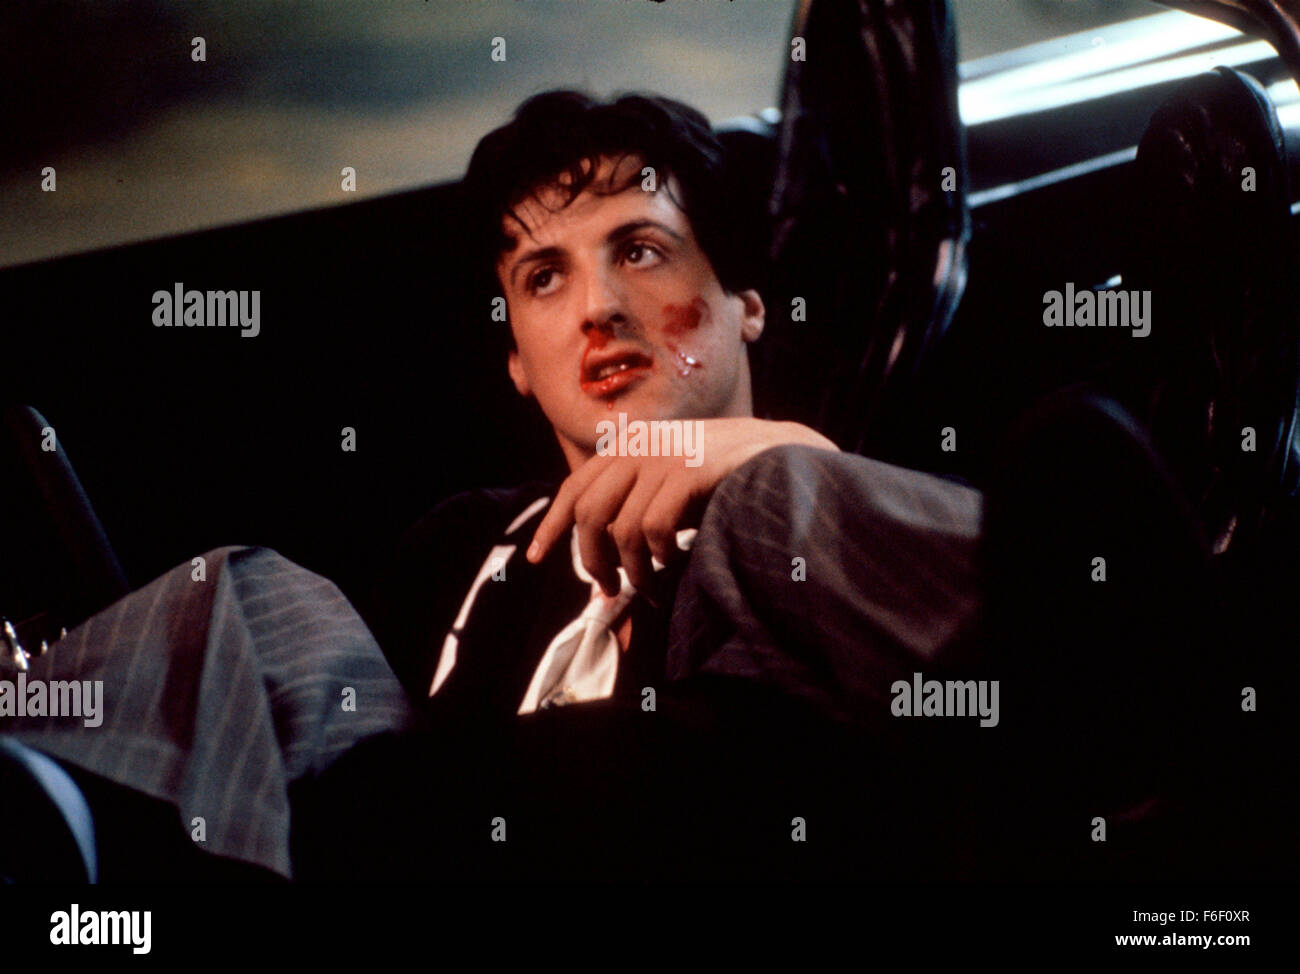 Apr 01, 1975; Los Angeles, CA, USA; SYLVESTER STALLONE as Machine Gun Joe Viterbo in the action, sport, sci-fi film 'Death Race 2000' directed by Paul Bartel. Stock Photo